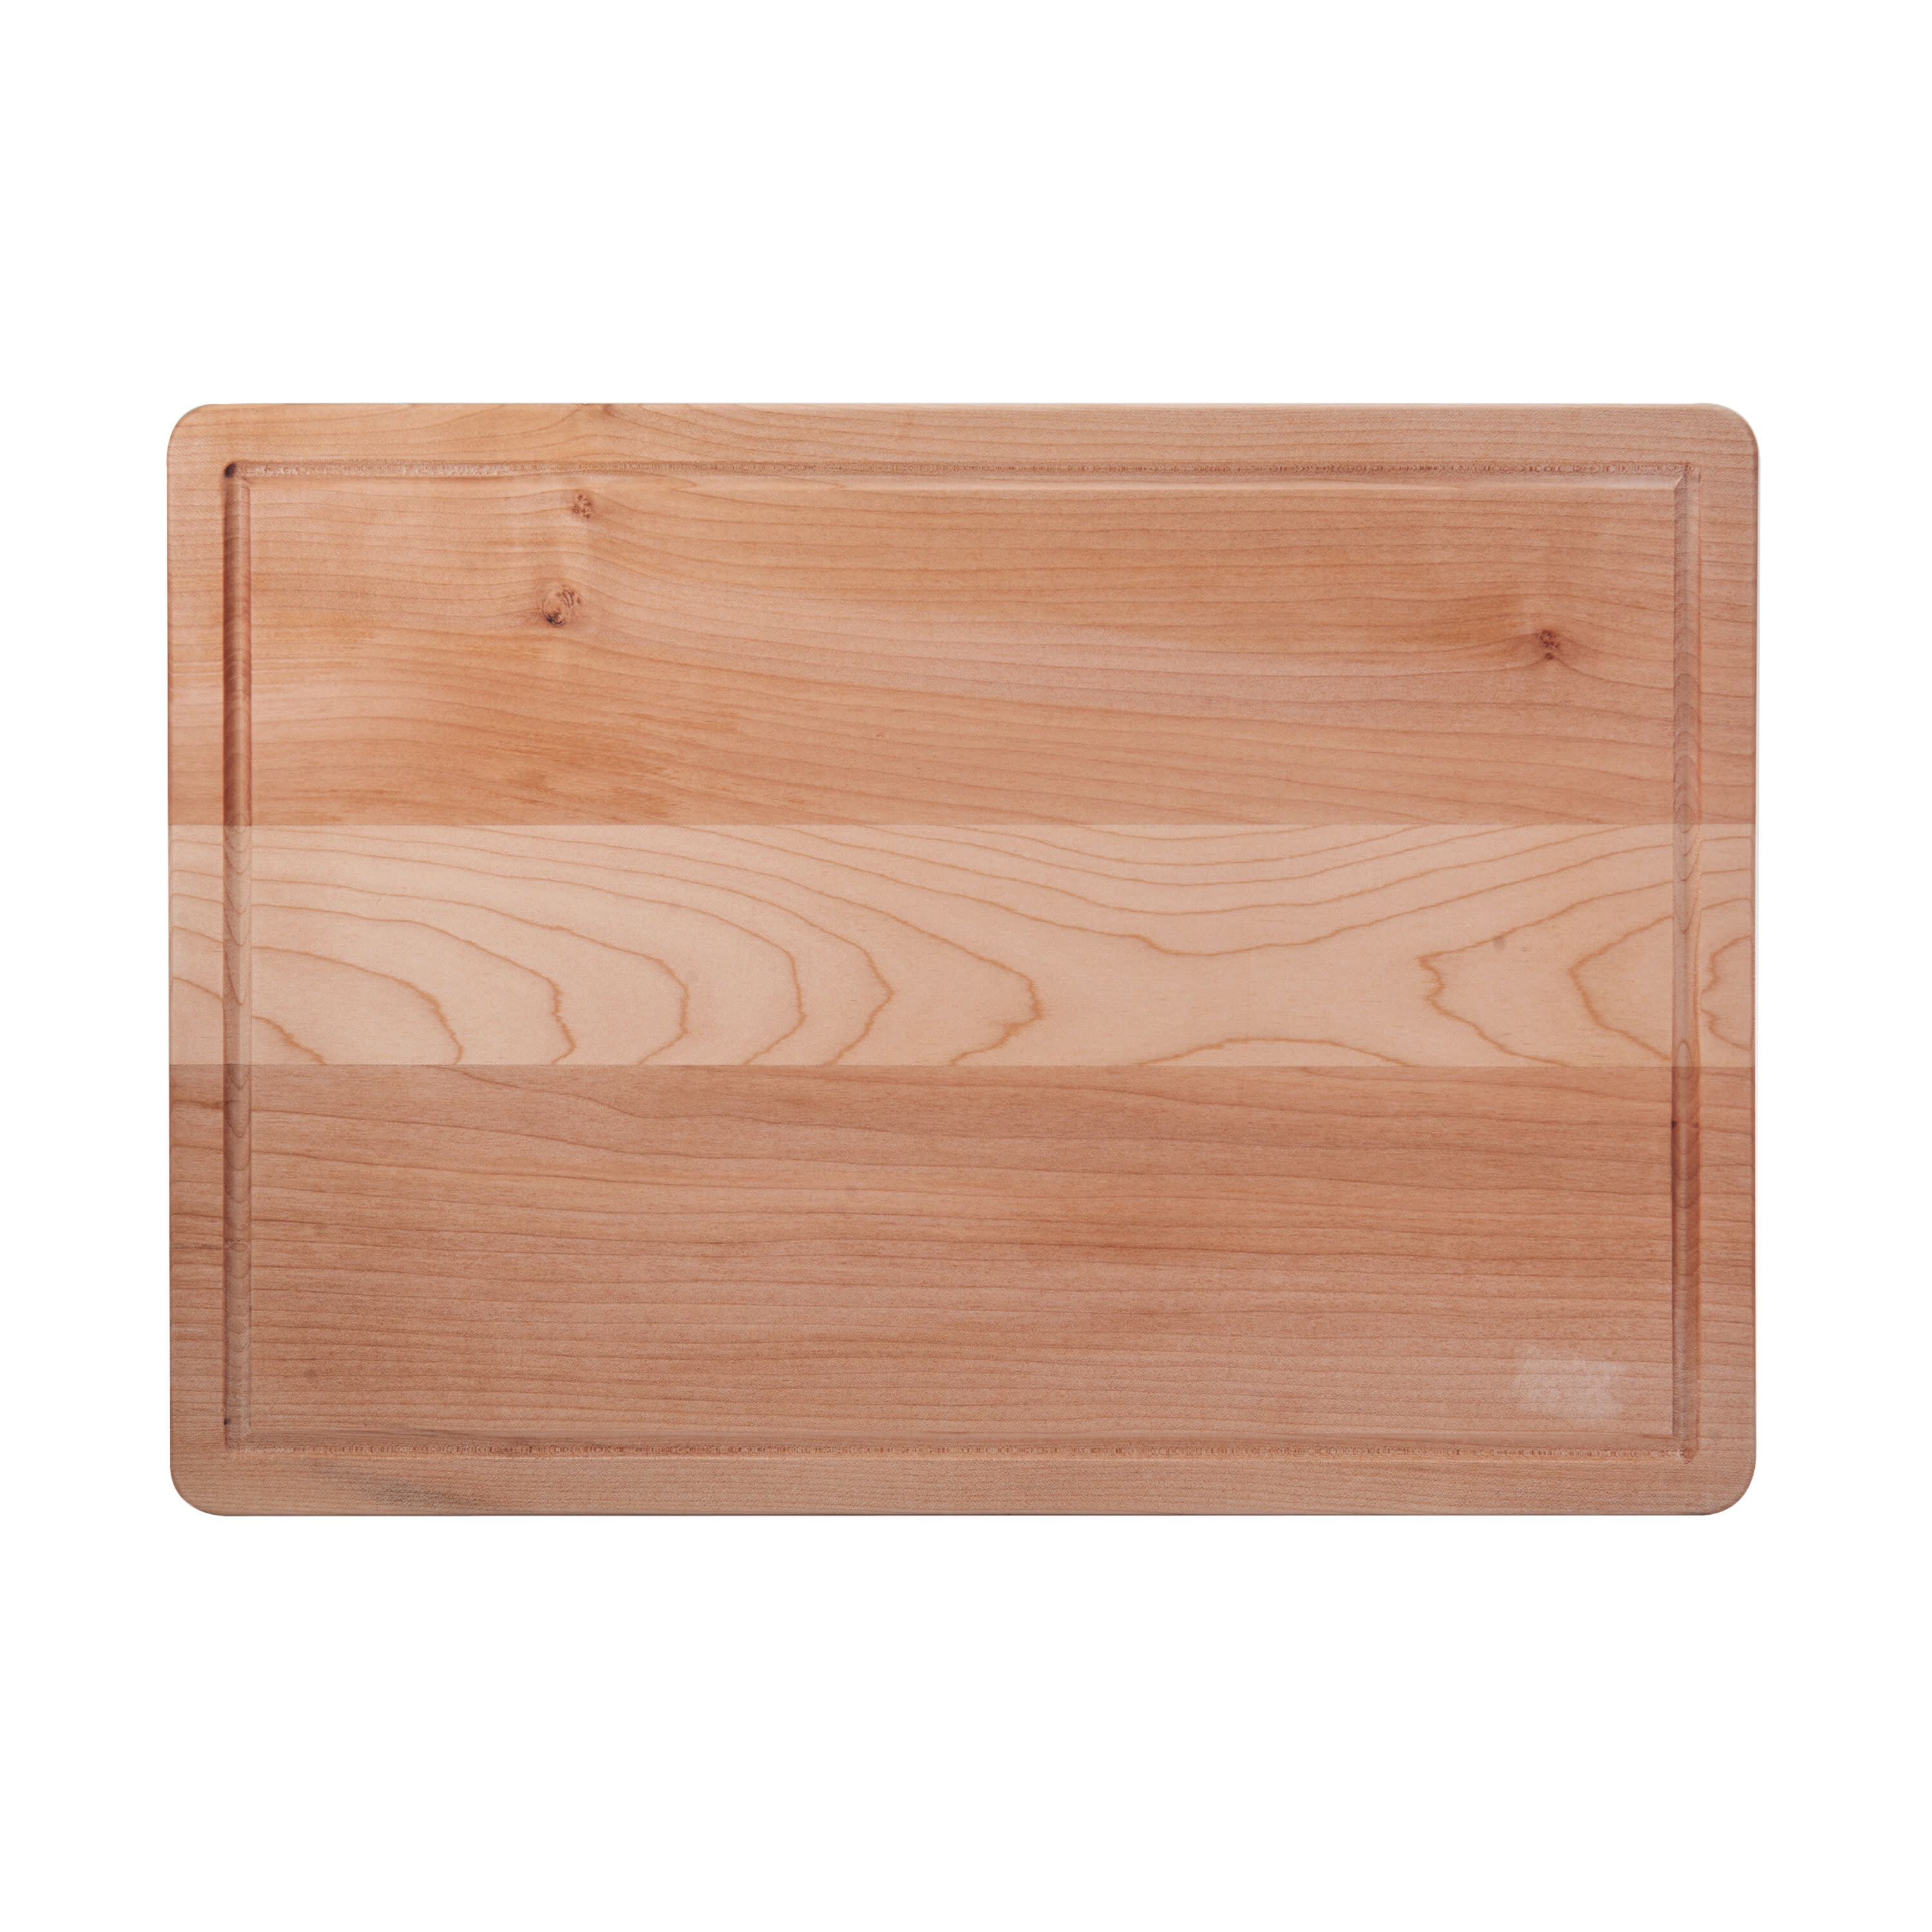 Bamboo Wood Chopping Board Kitchen Dicing Slicing Cutting Food Wooden 32 x 22 cm 